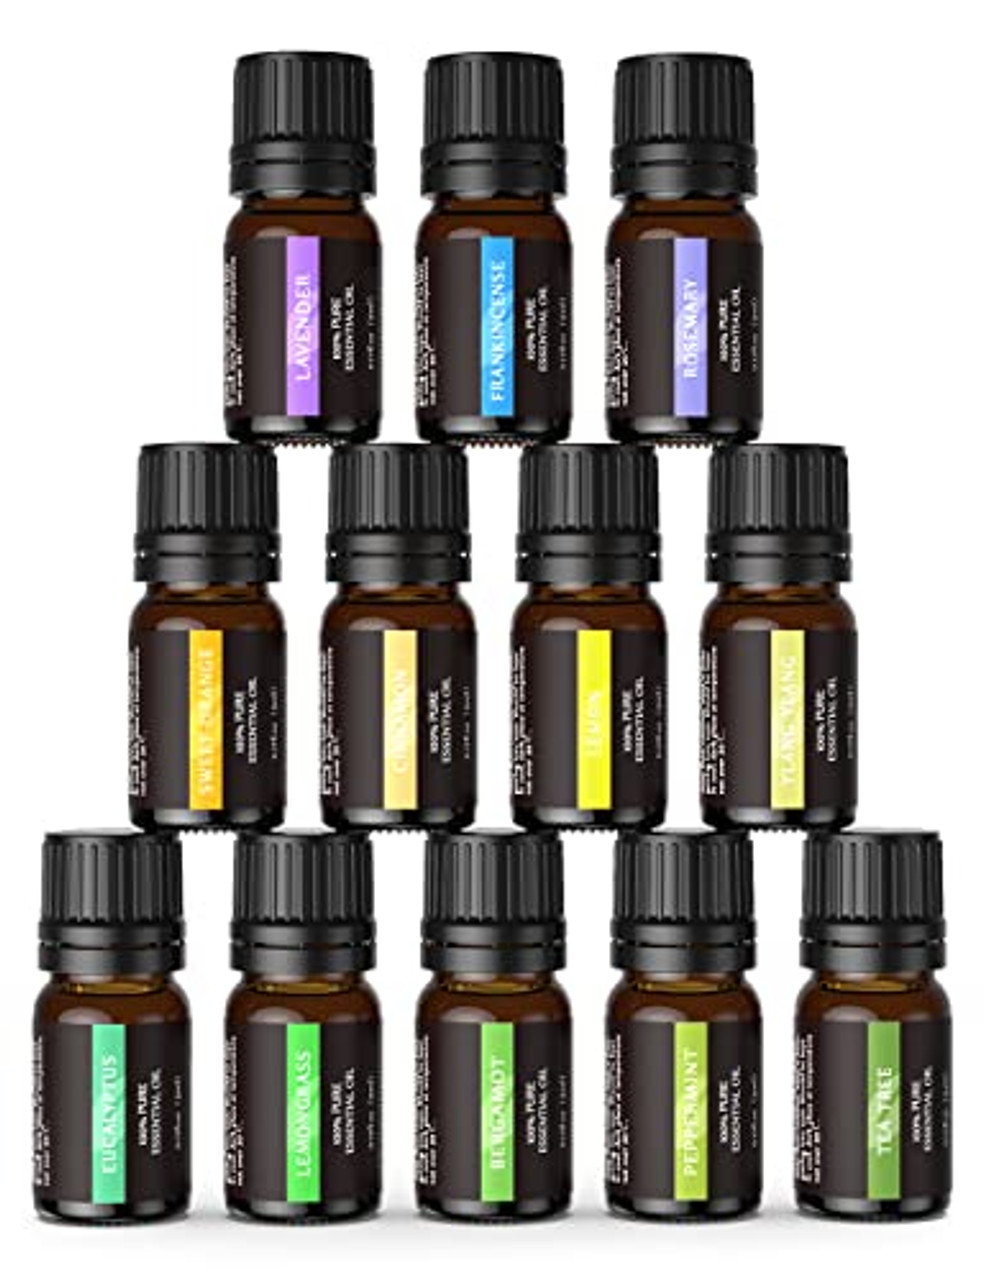 Essential Oils for Diffusers for Home - Set of 6 - Tea Tree, Rosemary,  Lavender, Peppermint, Orange, Eucalyptus 